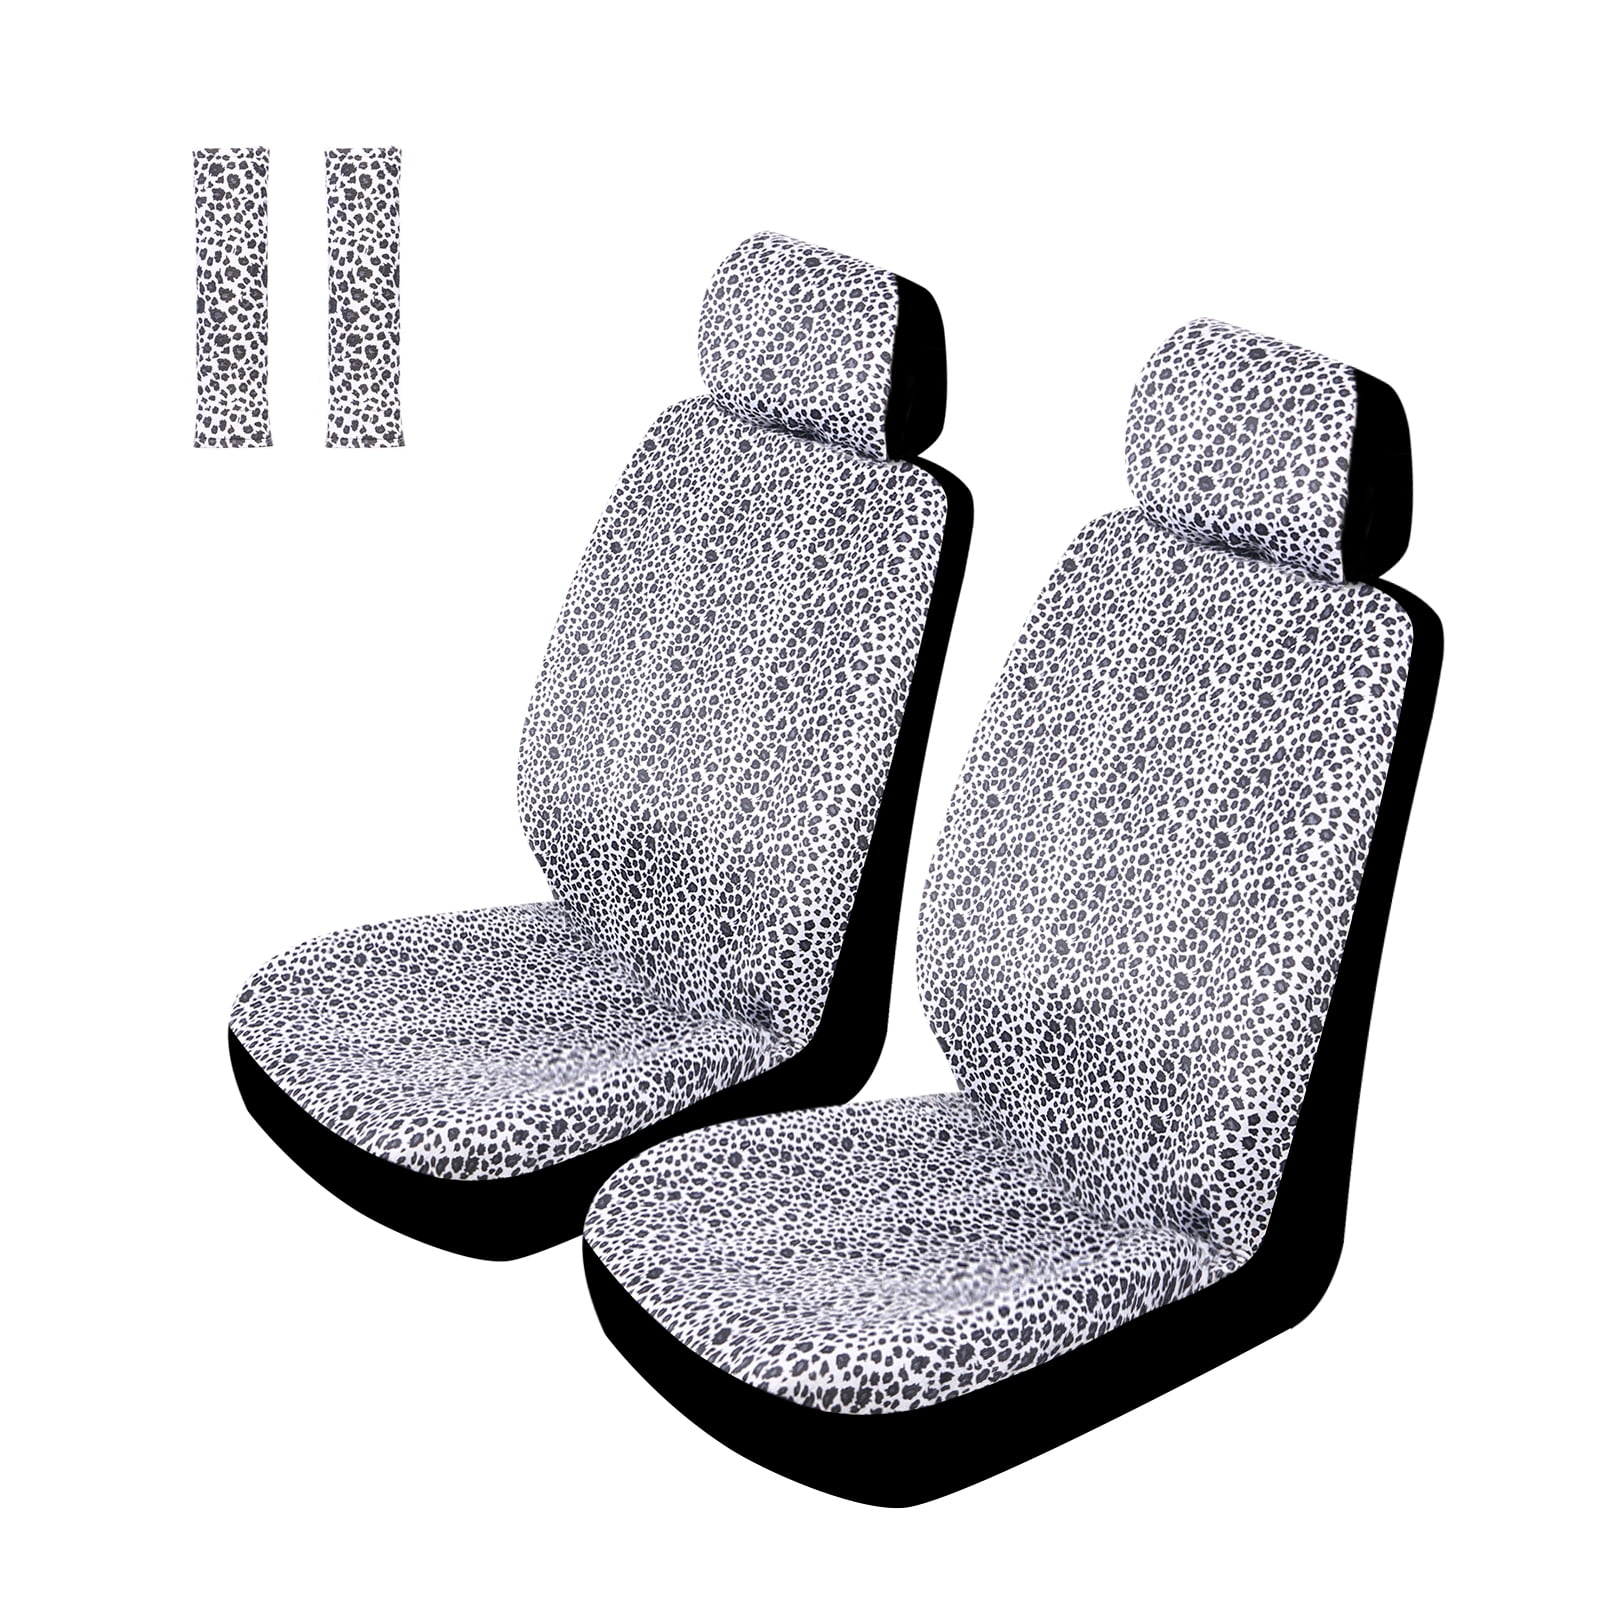 WHITE TIGER FAUX FUR CAR SEAT COVERS FRONT PAIR